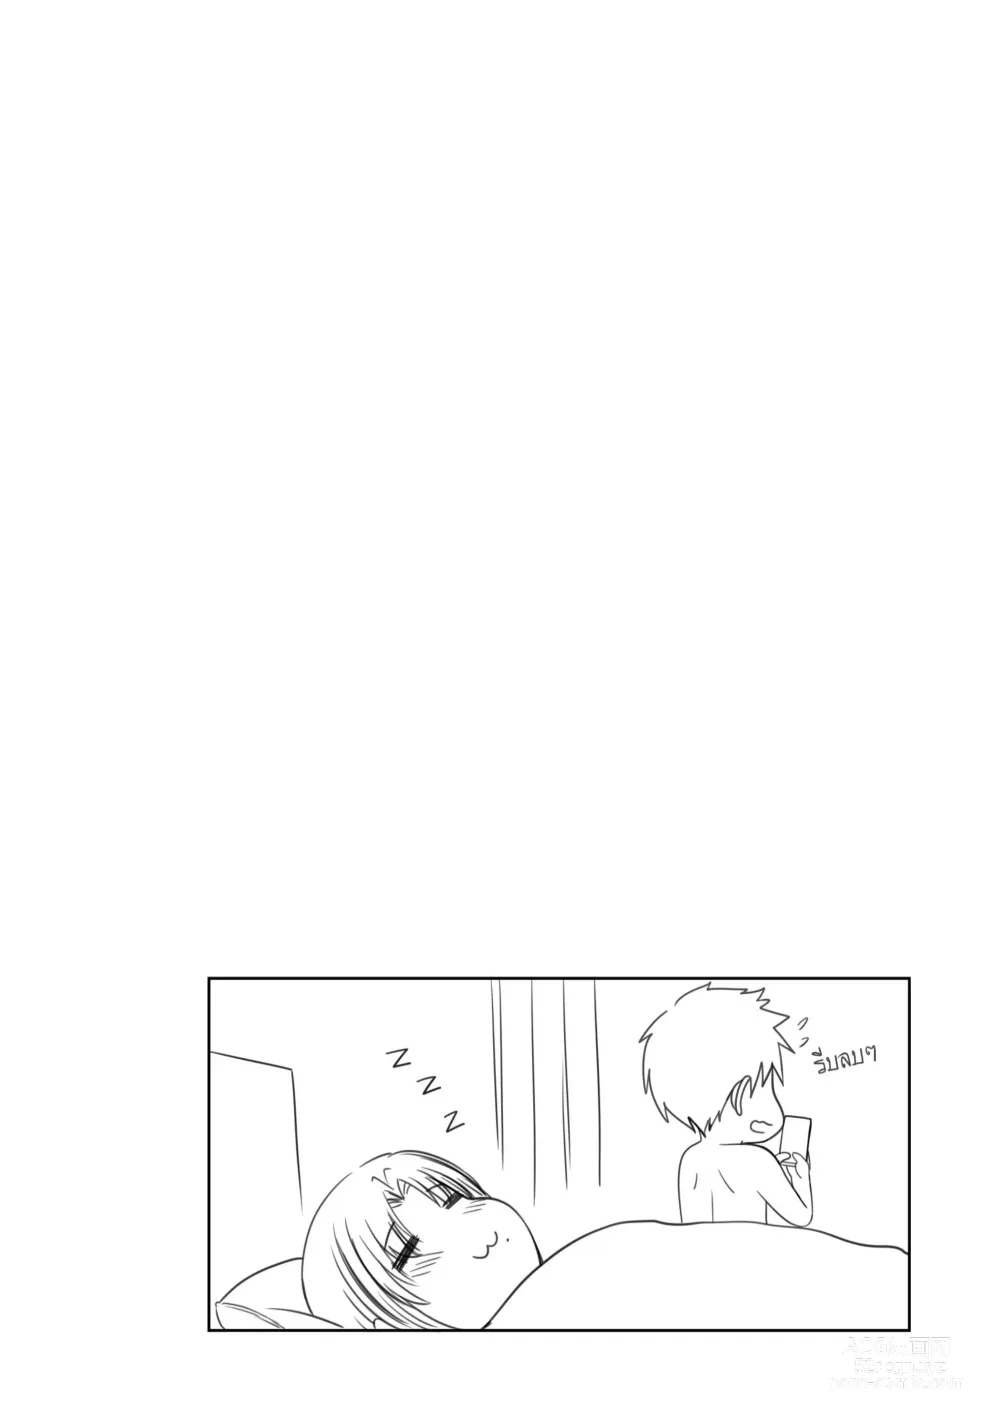 Page 74 of doujinshi My Mother (decensored)